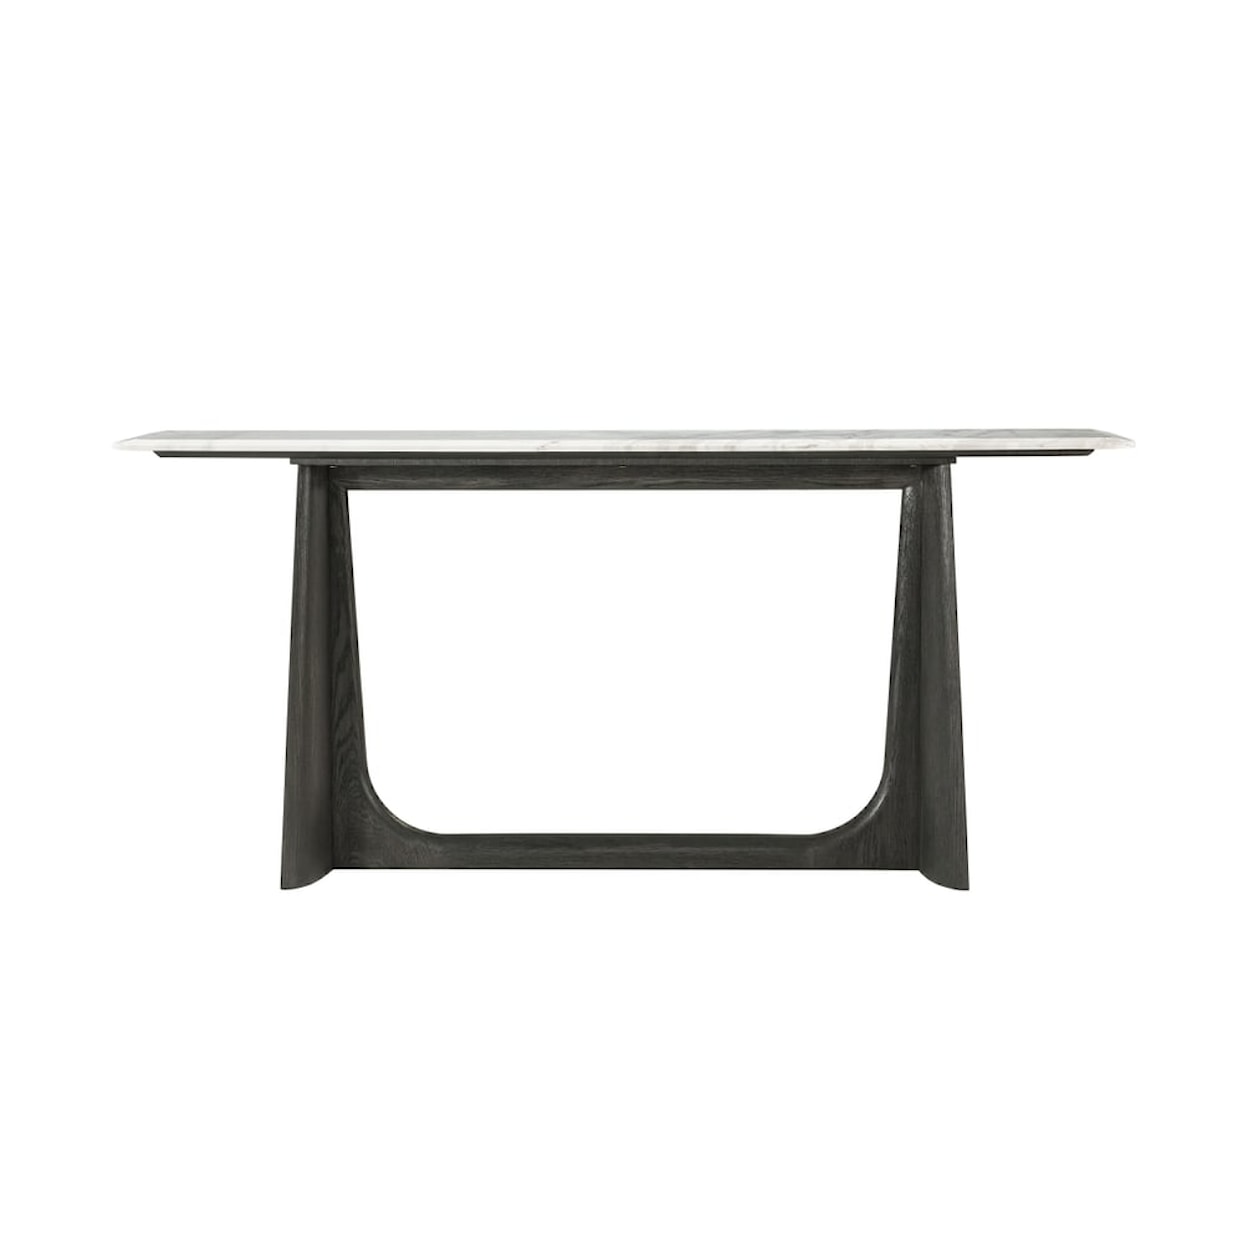 Theodore Alexander Repose Repose Wooden Console Table Marble Top